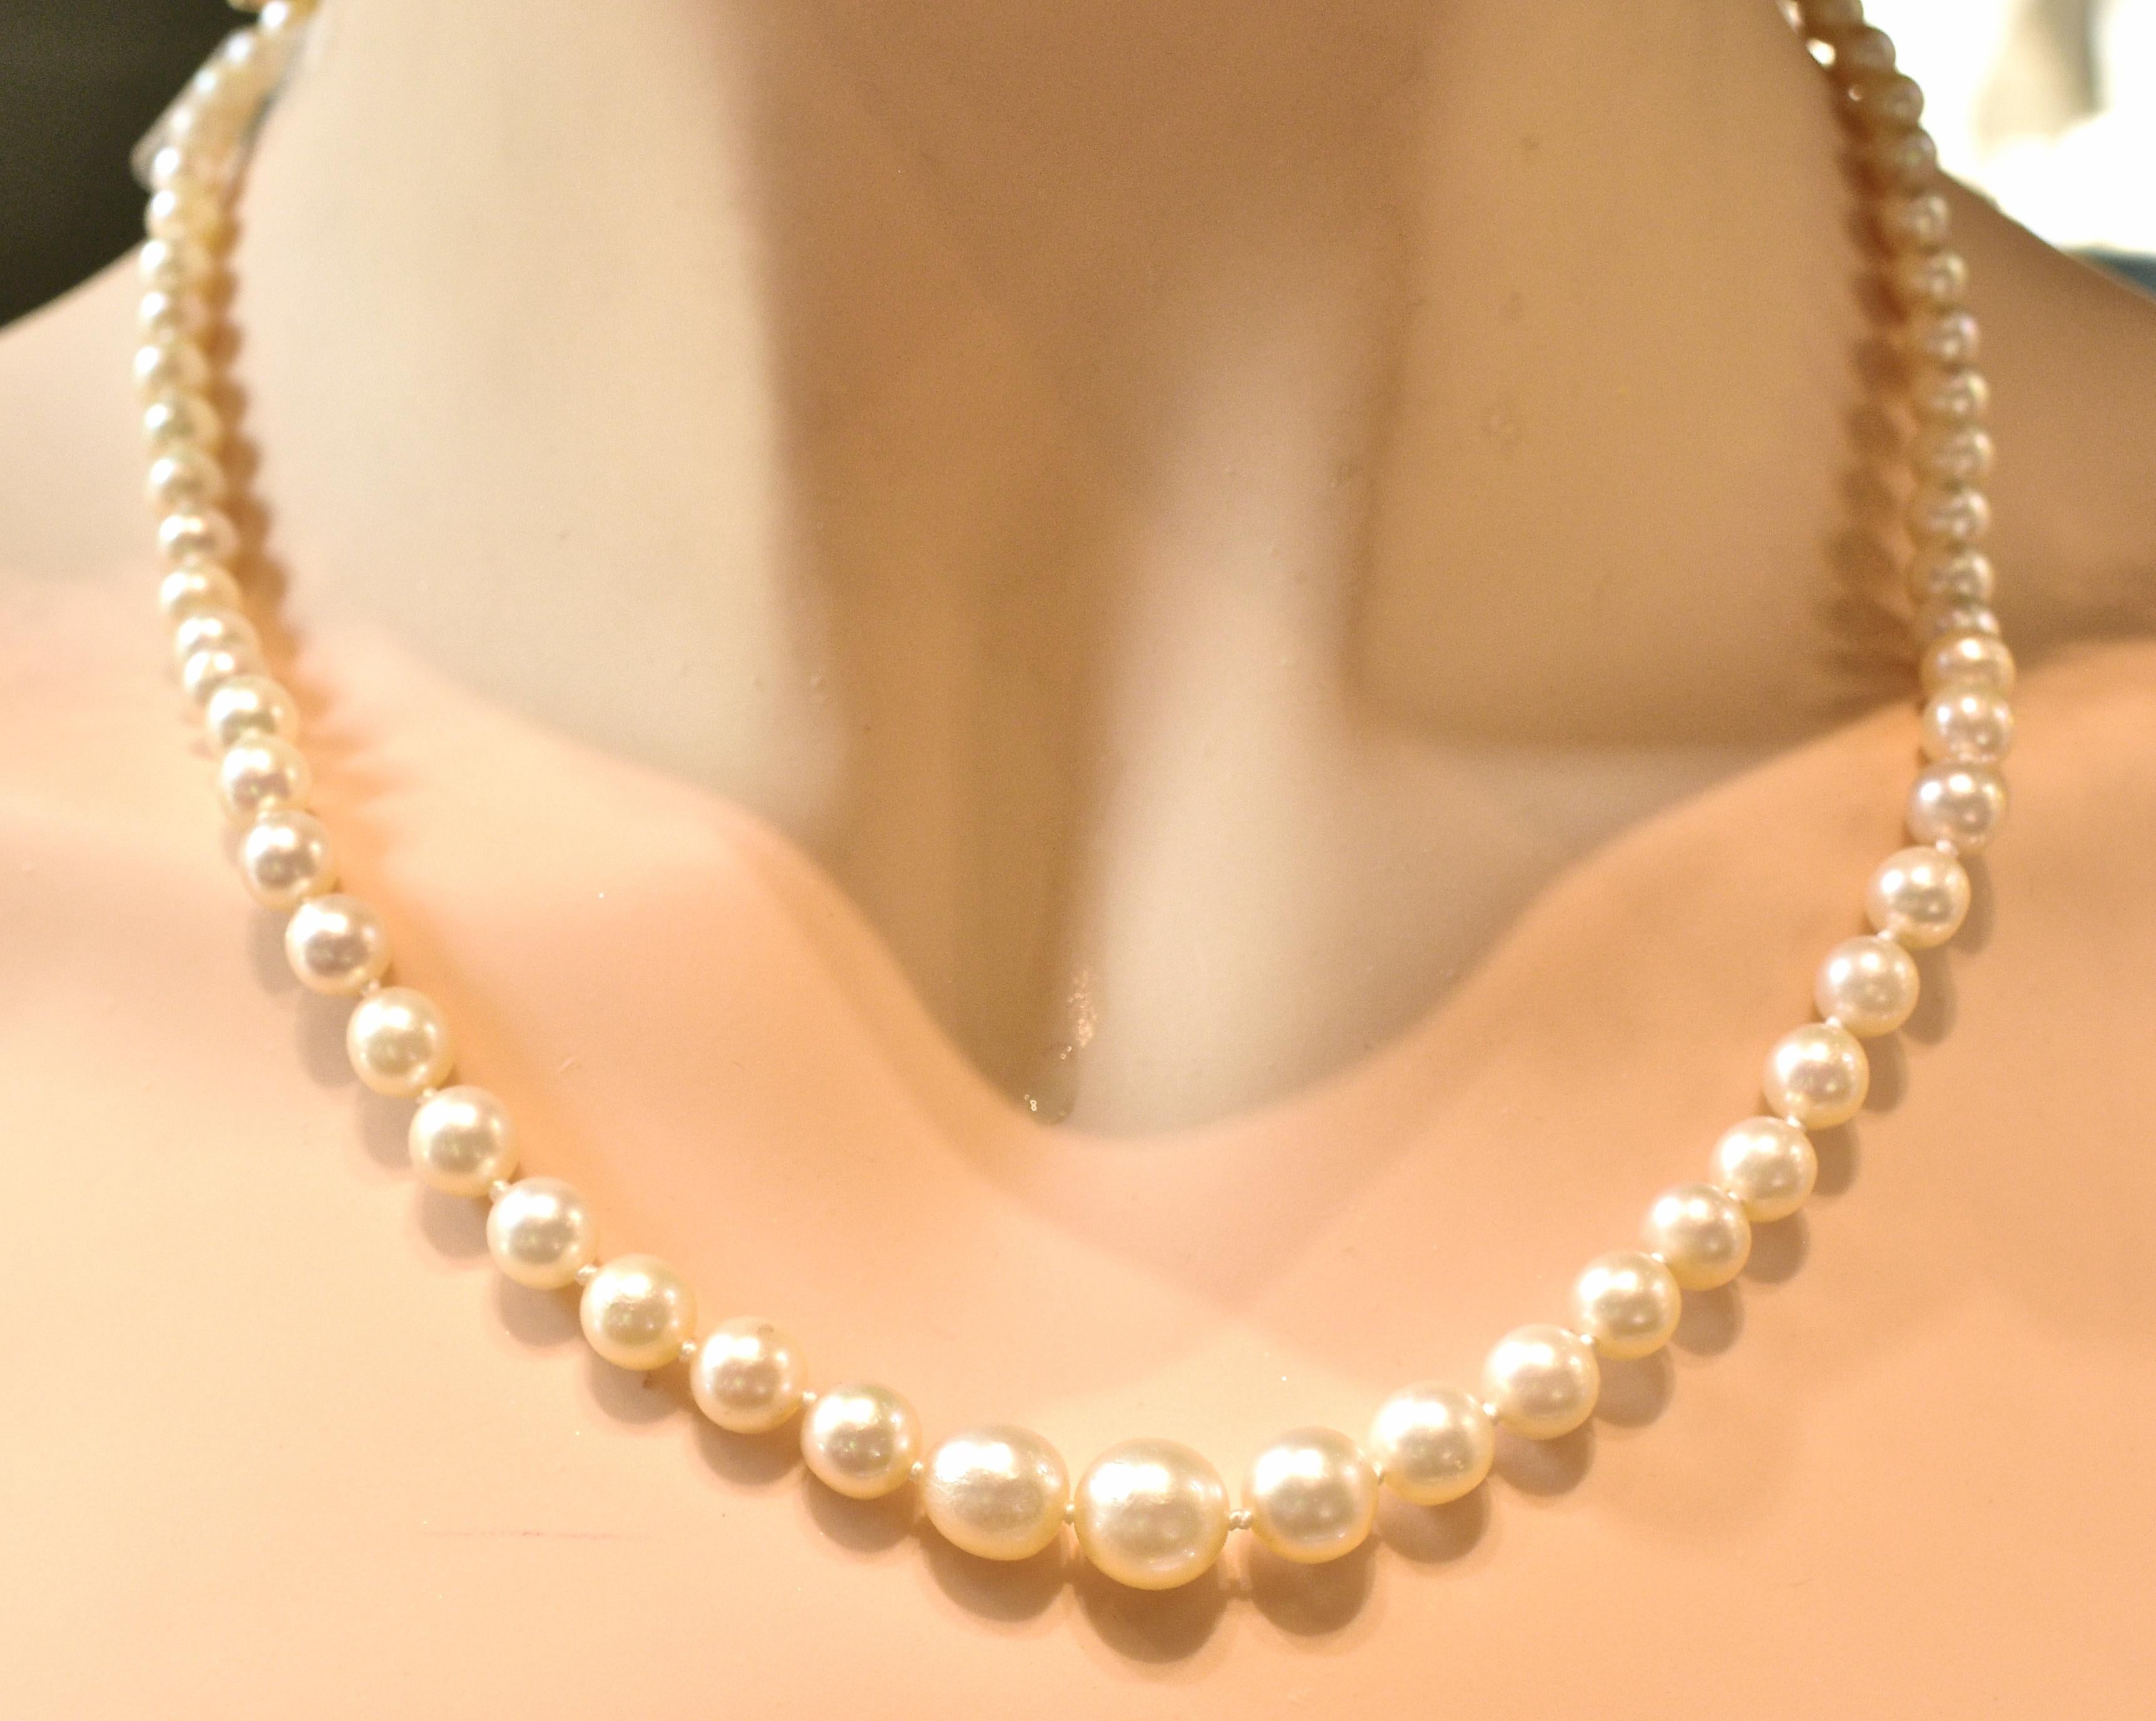 Women's or Men's Strand of Fine Cultured Akoya Pearls with a Gold Clasp